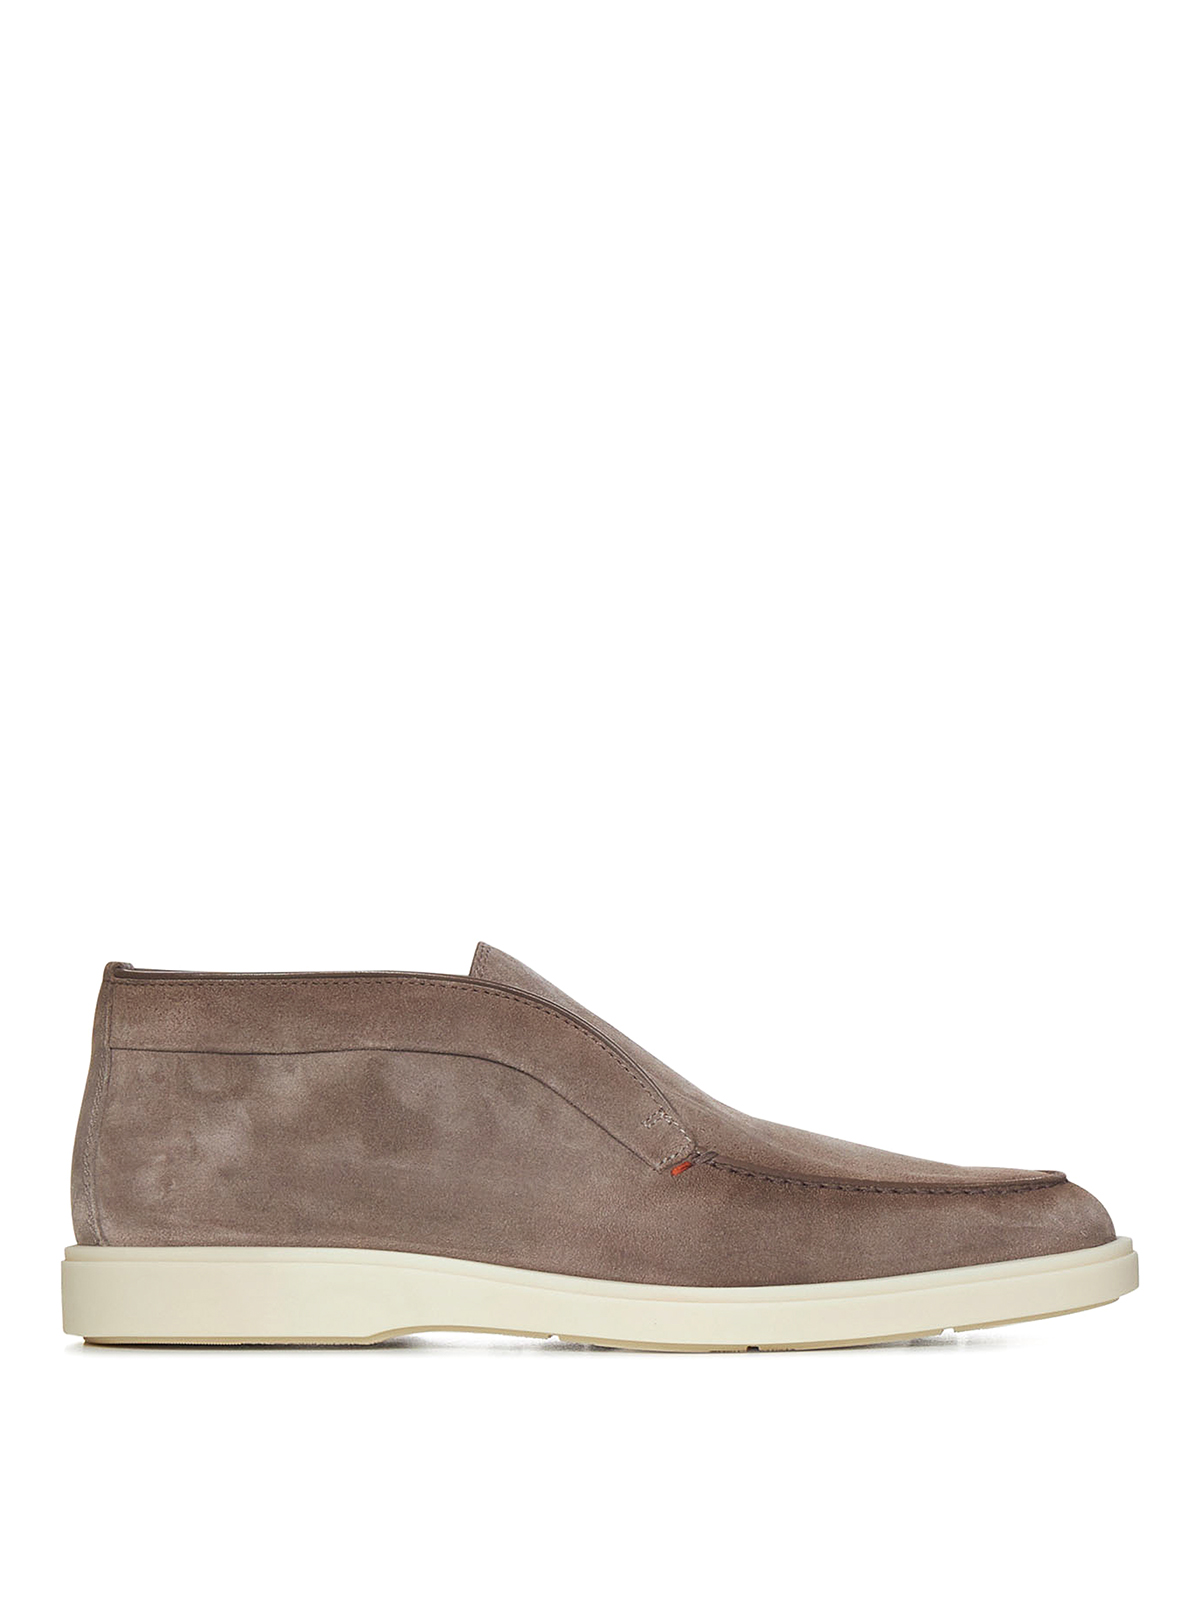 Santoni Desert Ankle Boots In Taupe Suede In Beige